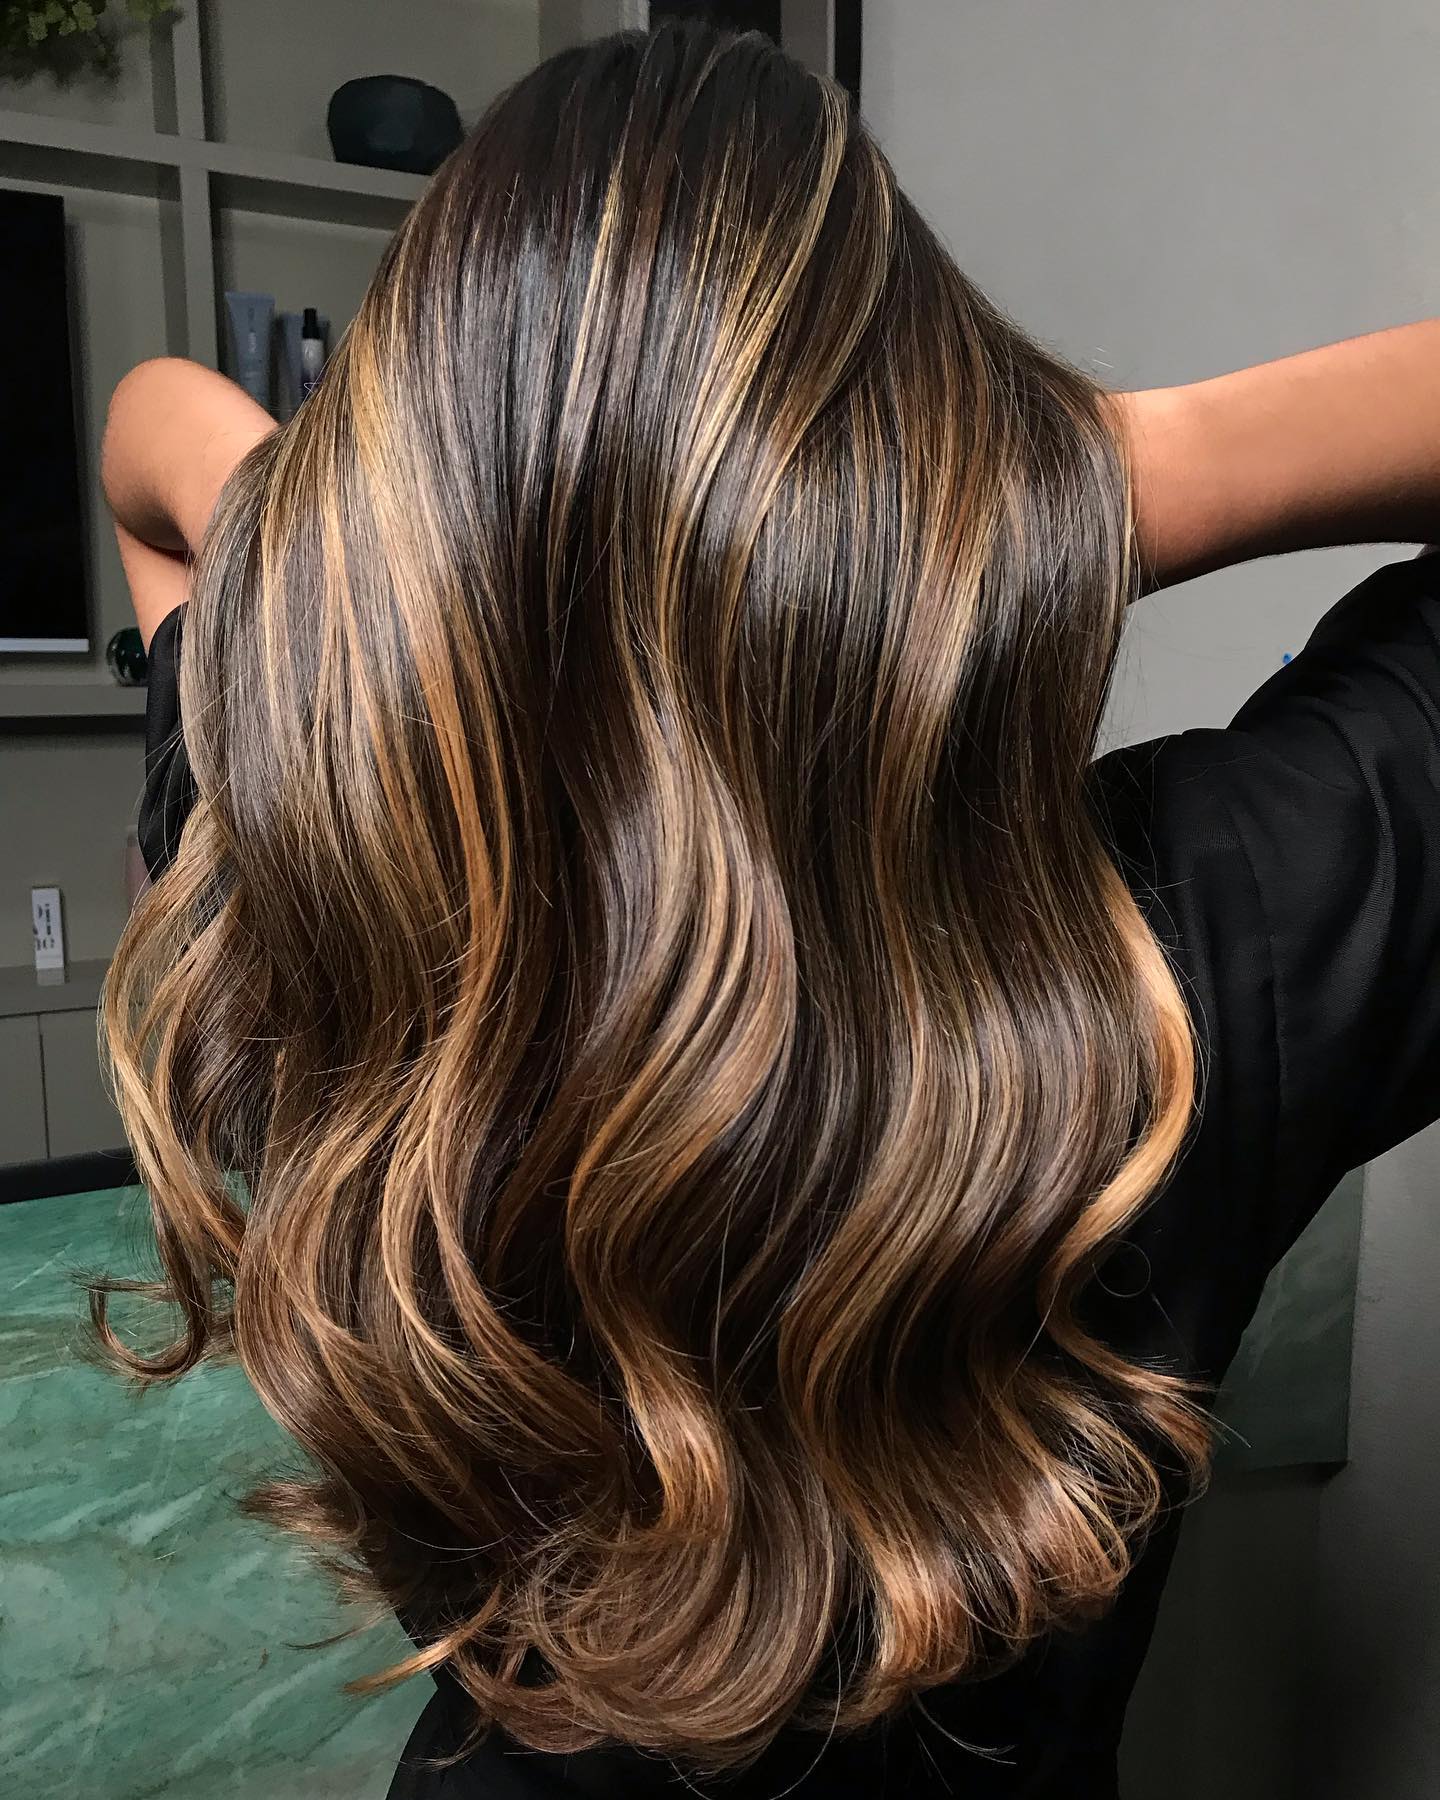 Caramel Hair Color is the Sweet Trending Shade You Need to Try | Hair.com  By L'Oréal